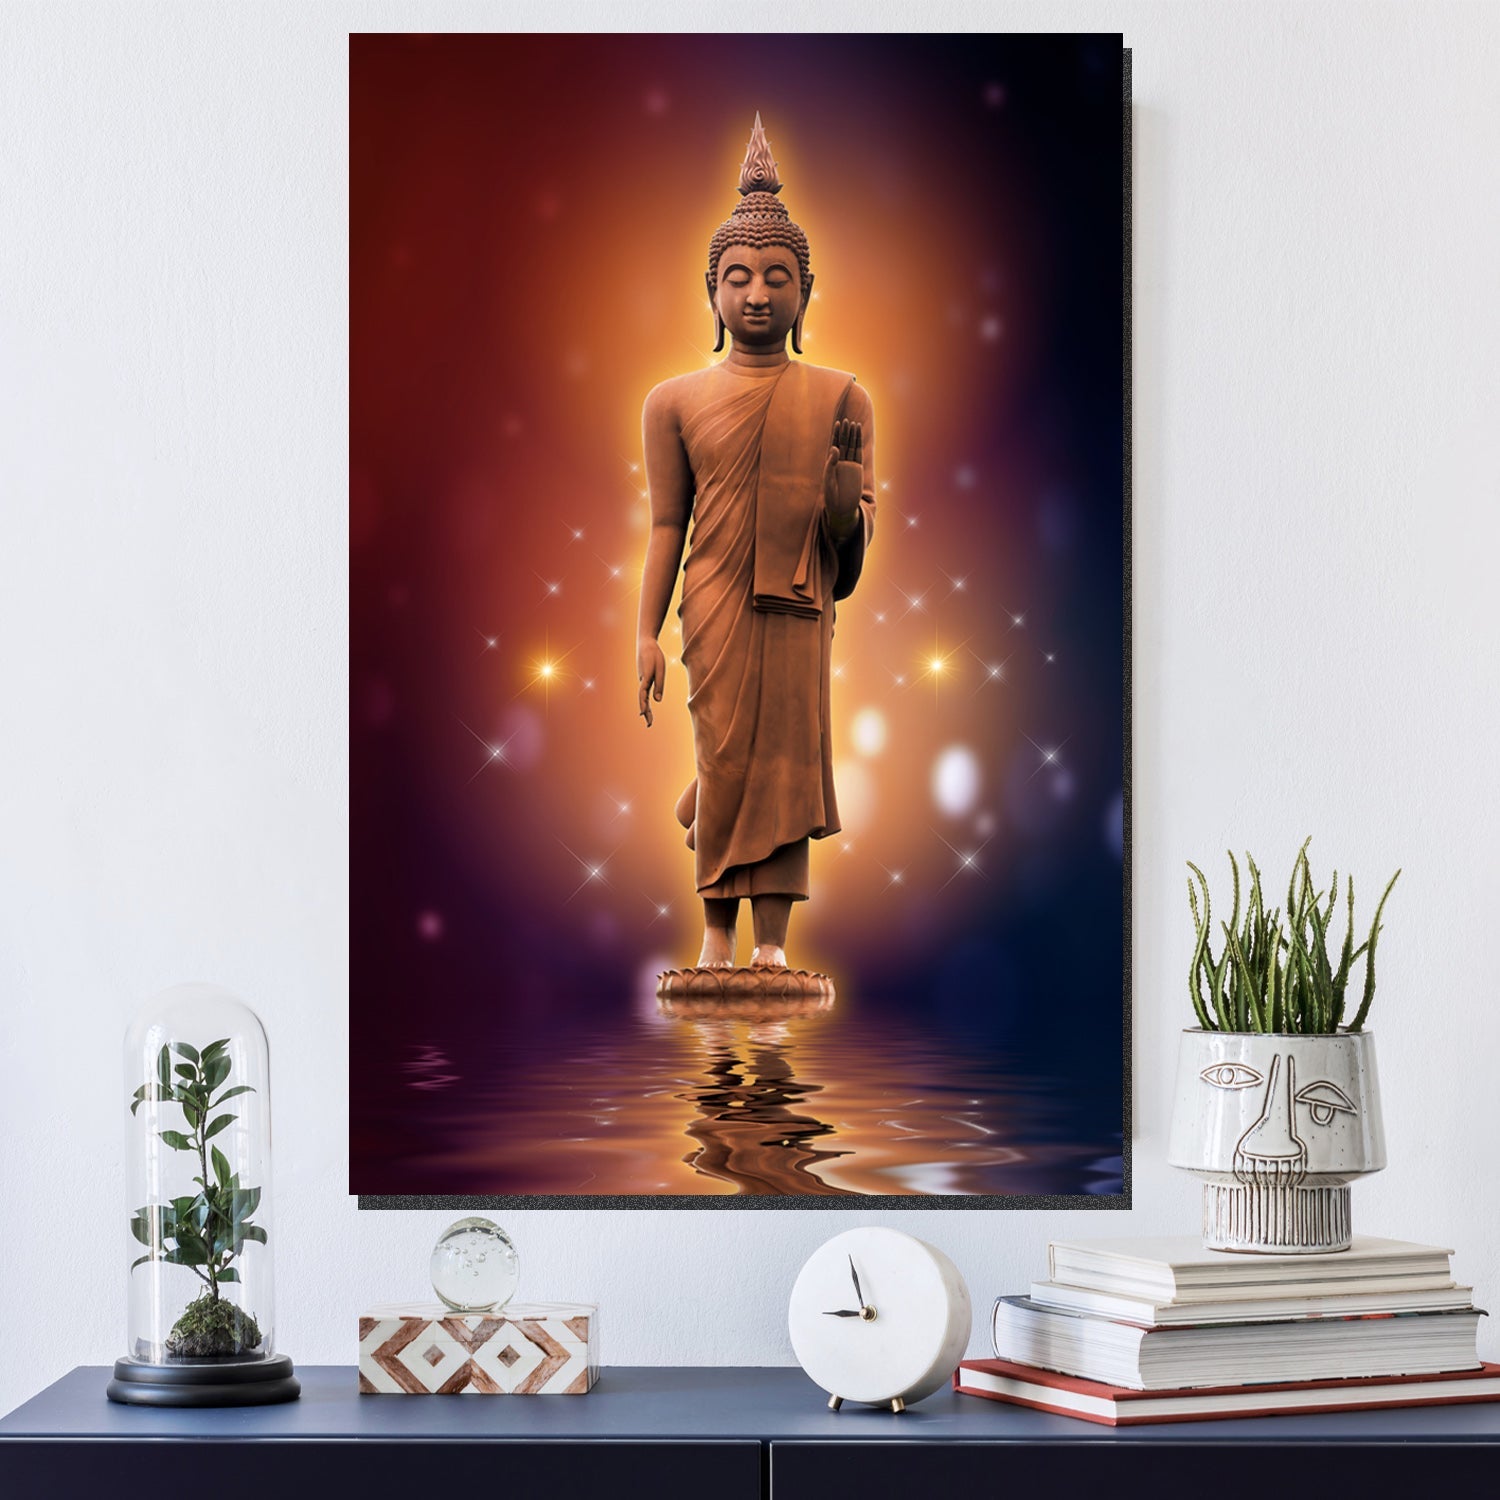 https://cdn.shopify.com/s/files/1/0387/9986/8044/products/BuddhaonWaterCanvasArtprintStretched-2.jpg